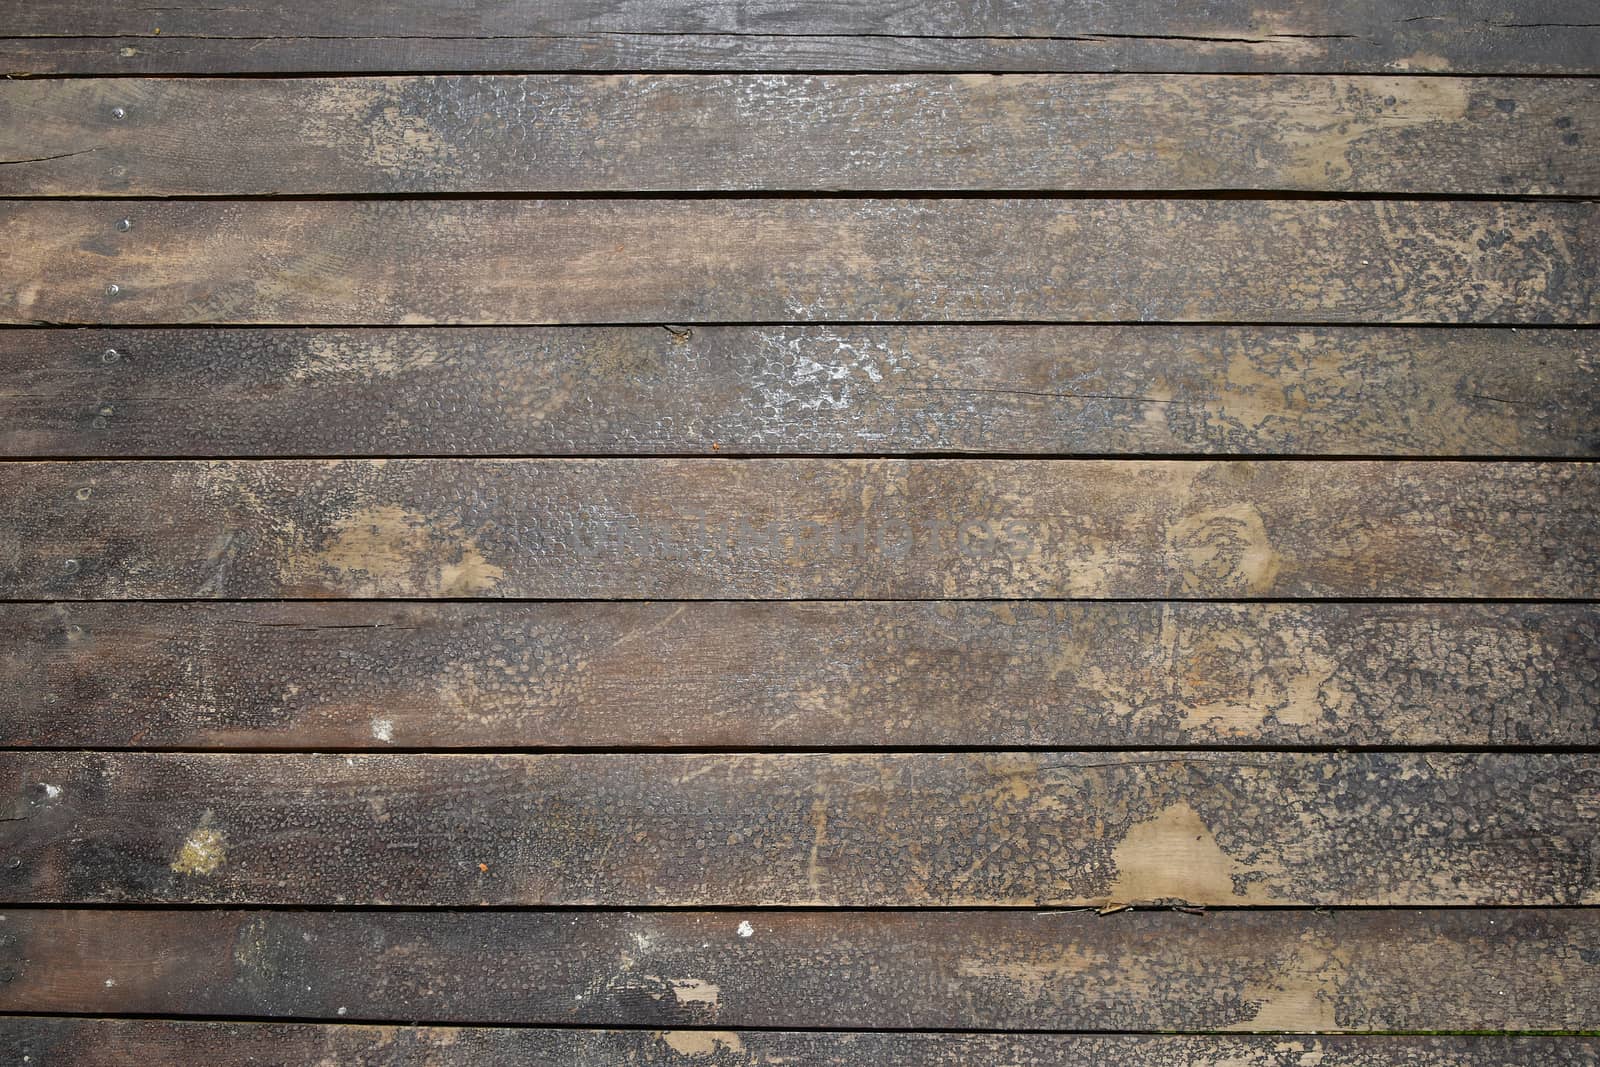 Old vintage rustic aged antique wooden sepia panel with horizontal gaps, planks and chinks